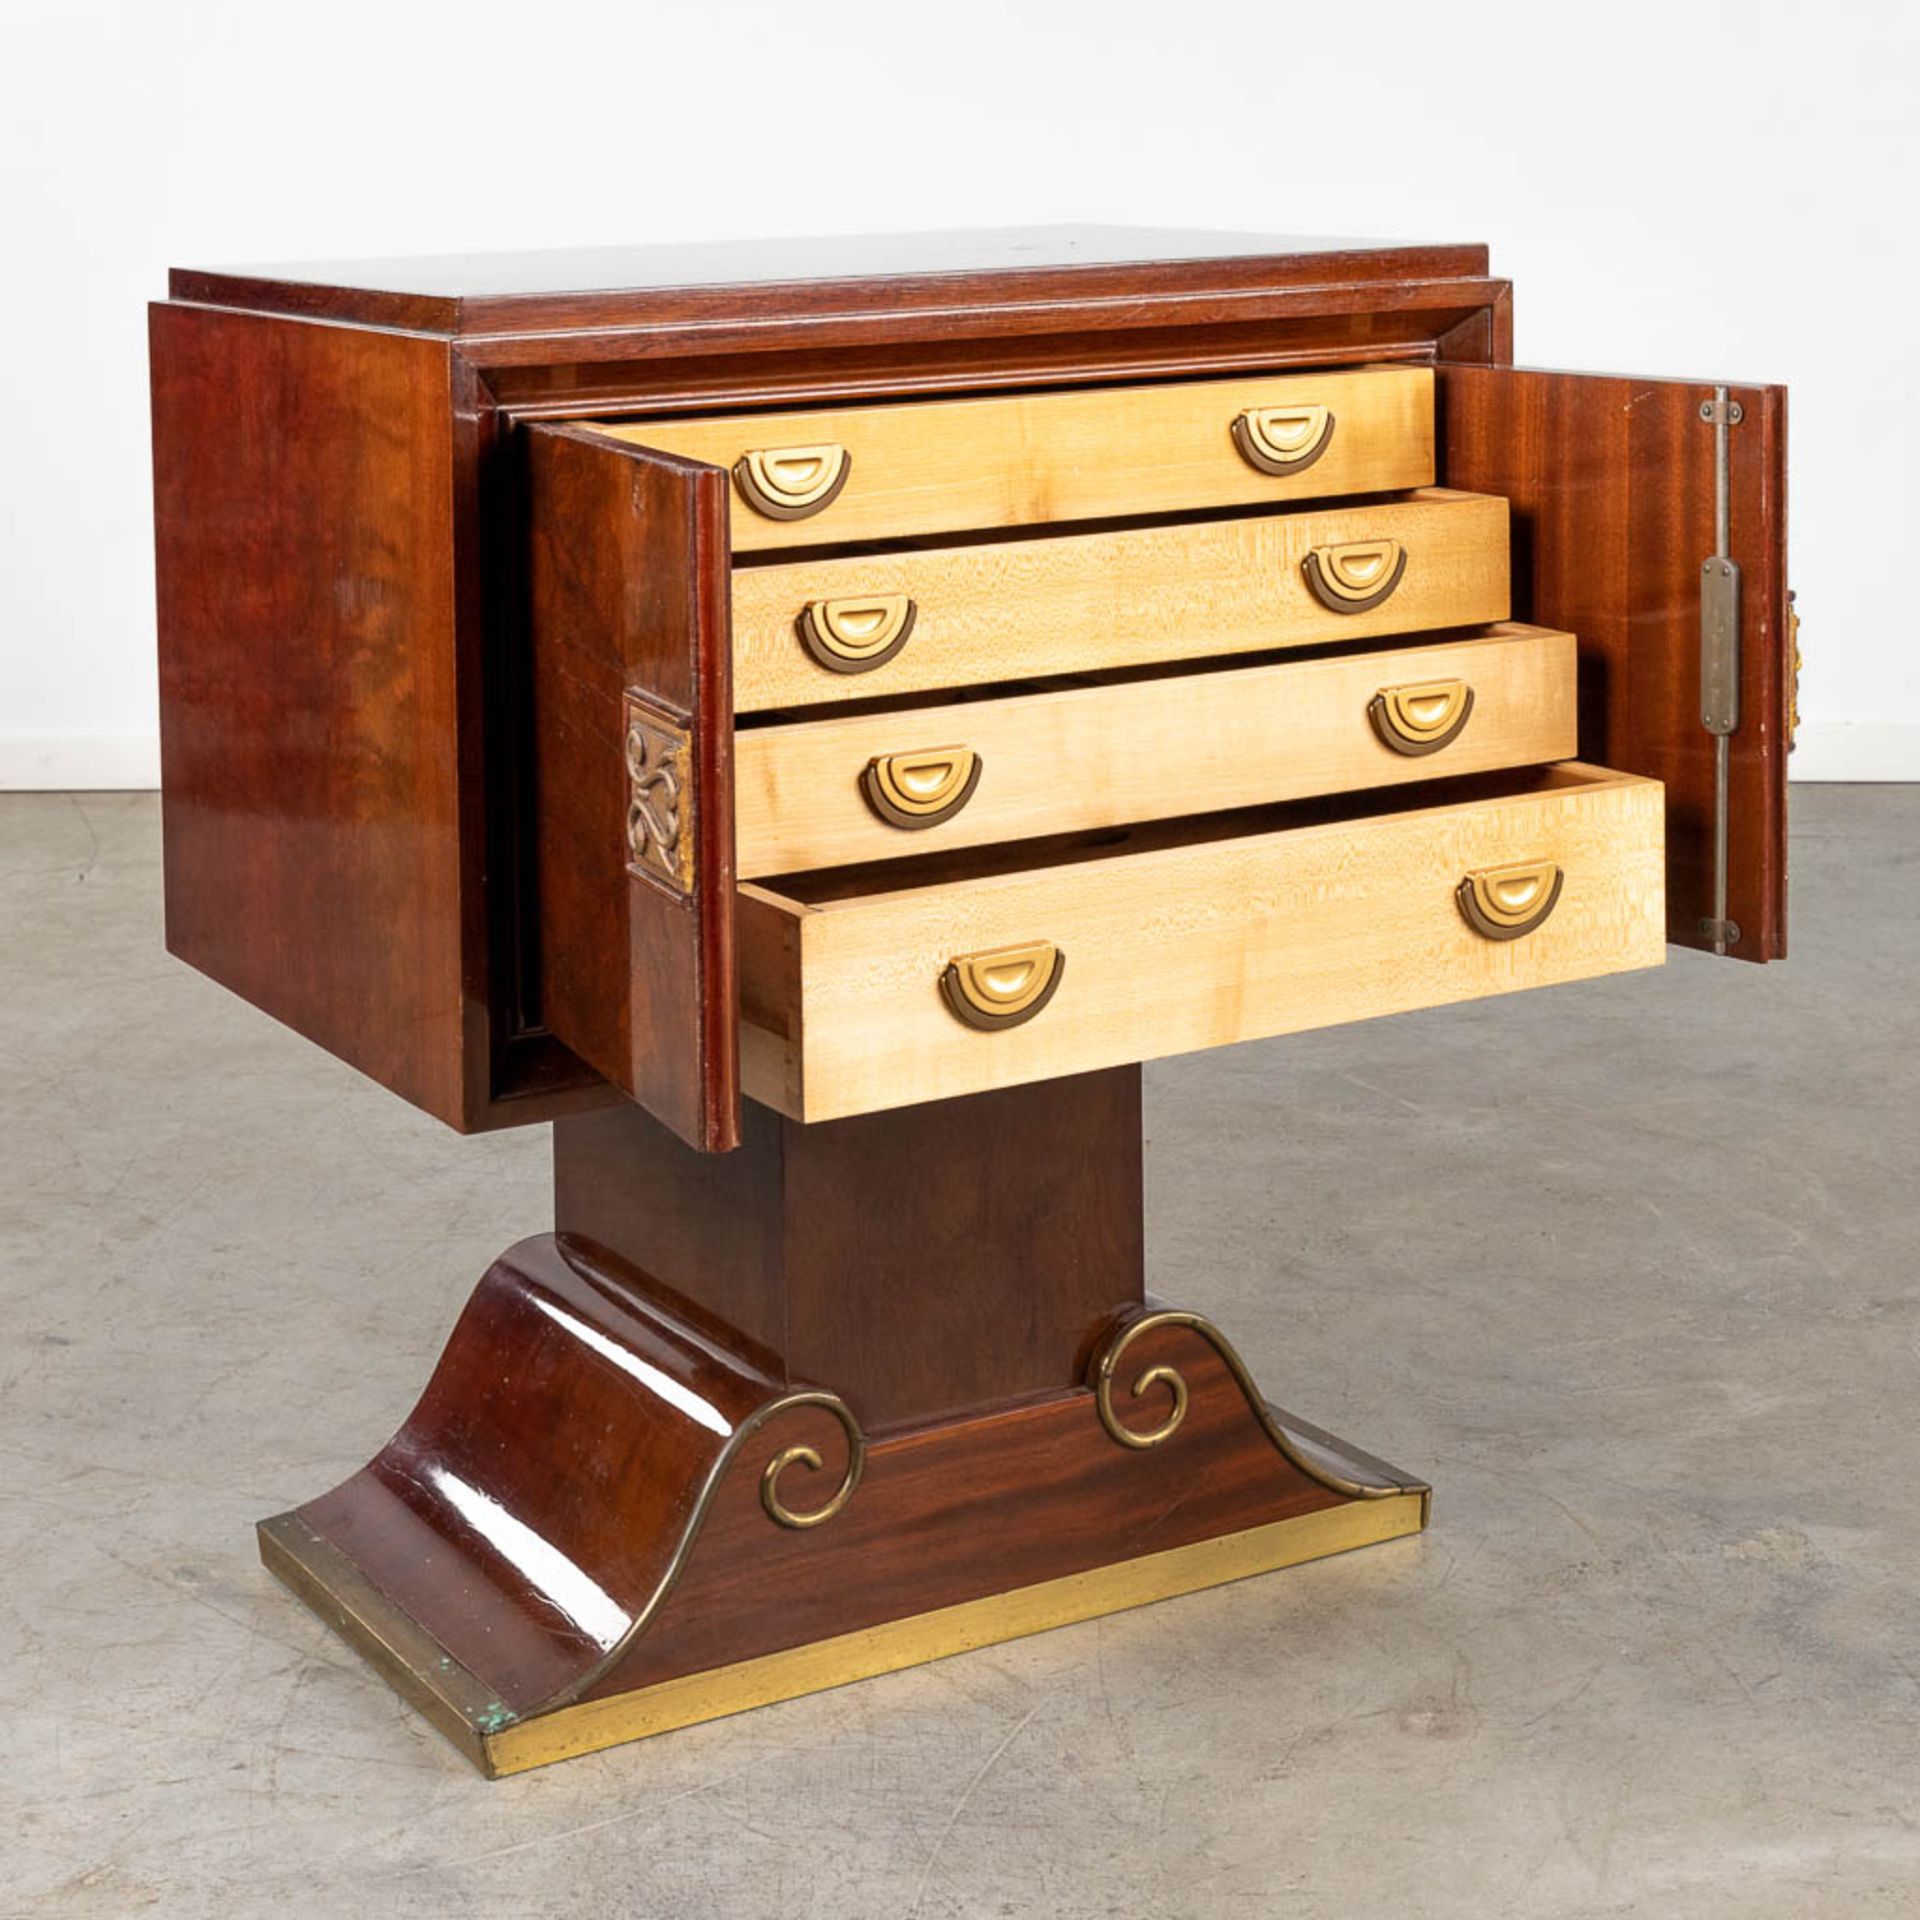 A cutlery case, veneered wood with 4 drawers, Probably made by Decoene. Circa 1950. (D:44 x W:64 x H - Image 4 of 15